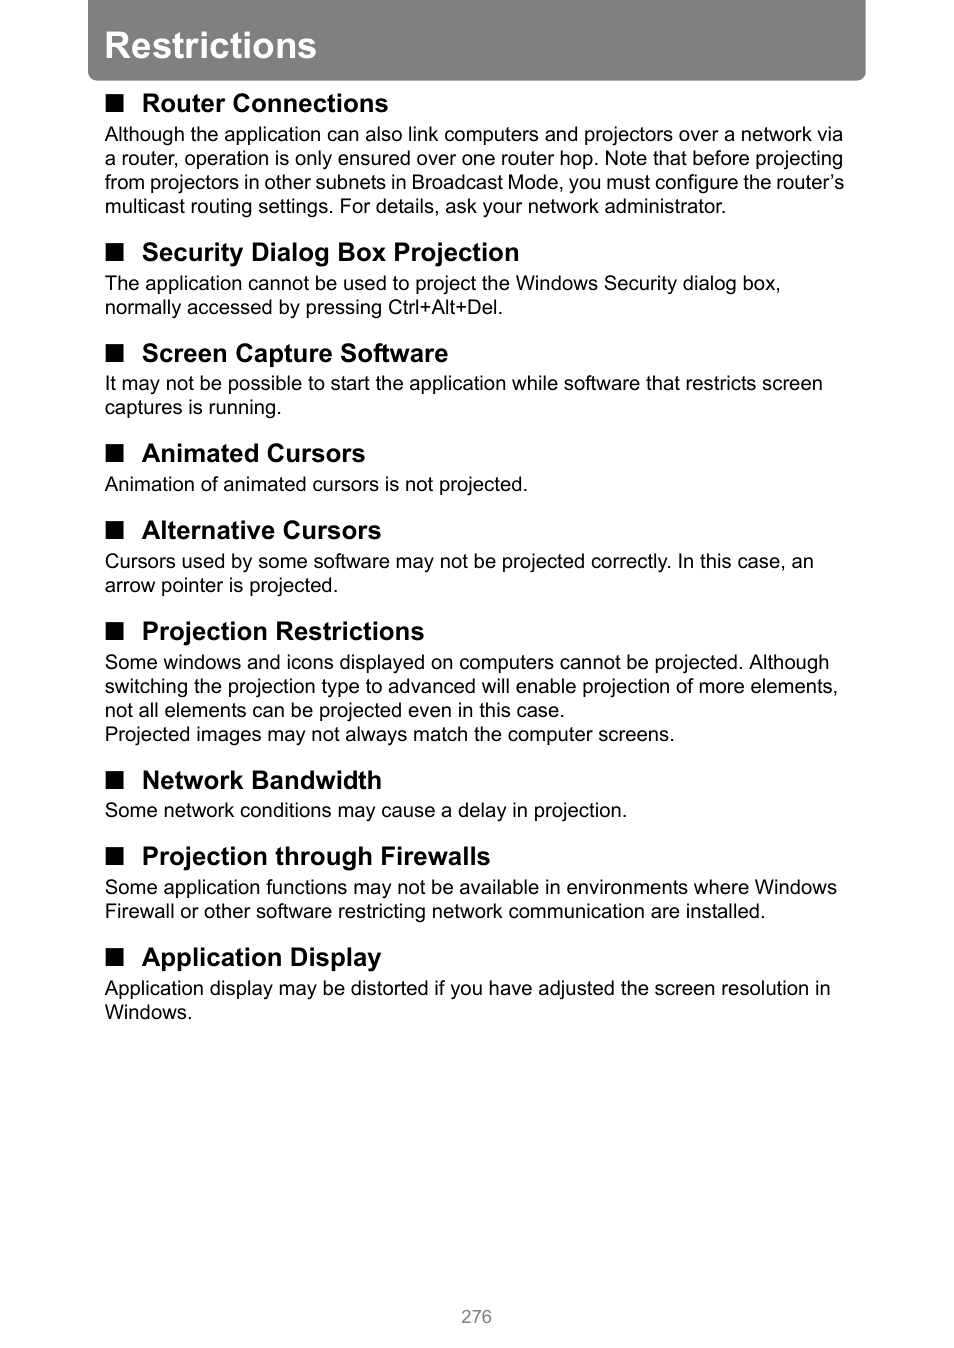 Restrictions, Router connections, Security dialog box projection | Screen capture software, Animated cursors, Alternative cursors, Projection restrictions, Network bandwidth, Projection through firewalls, Application display | Canon XEED WUX450 User Manual | Page 276 / 314